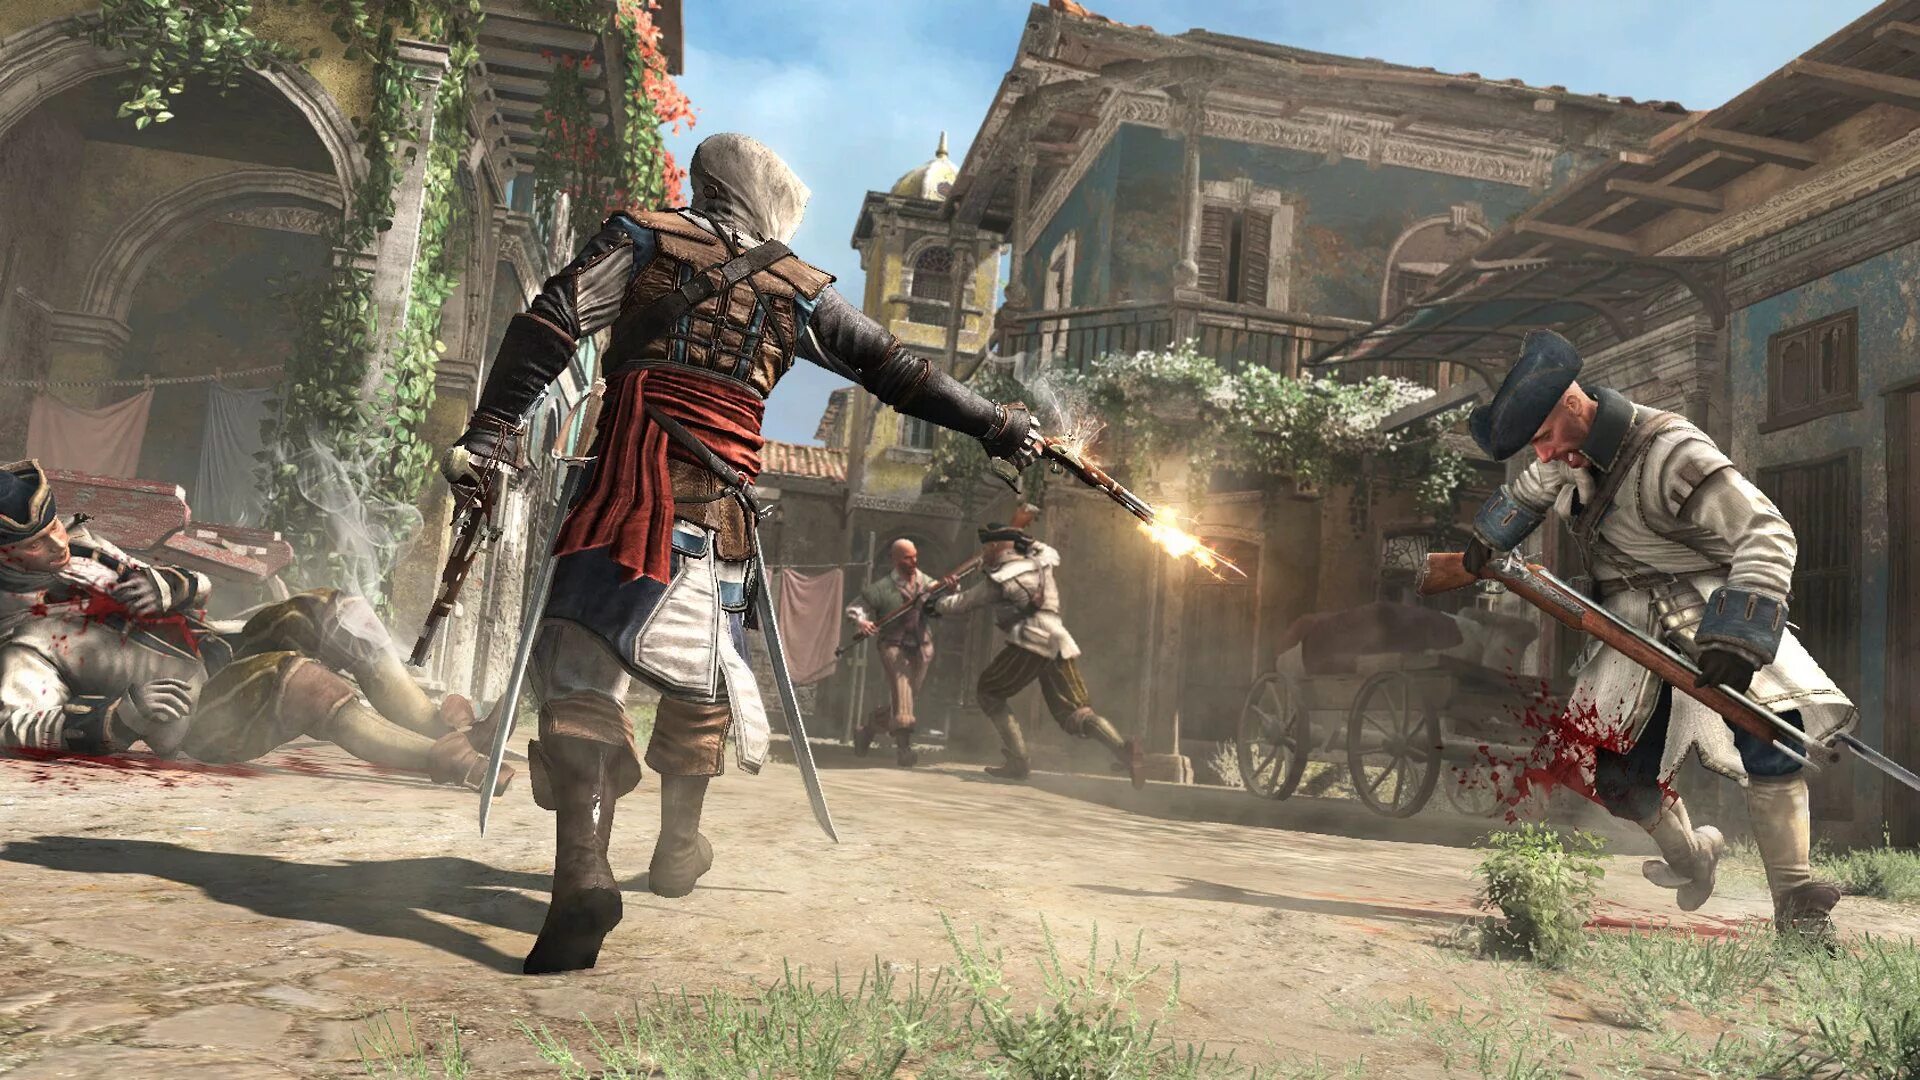 Assassin s Creed игра. Ассасин Крид 4 ПС 4. Assassin's Creed Black Flag ps4. Ассасин 3 ps4.